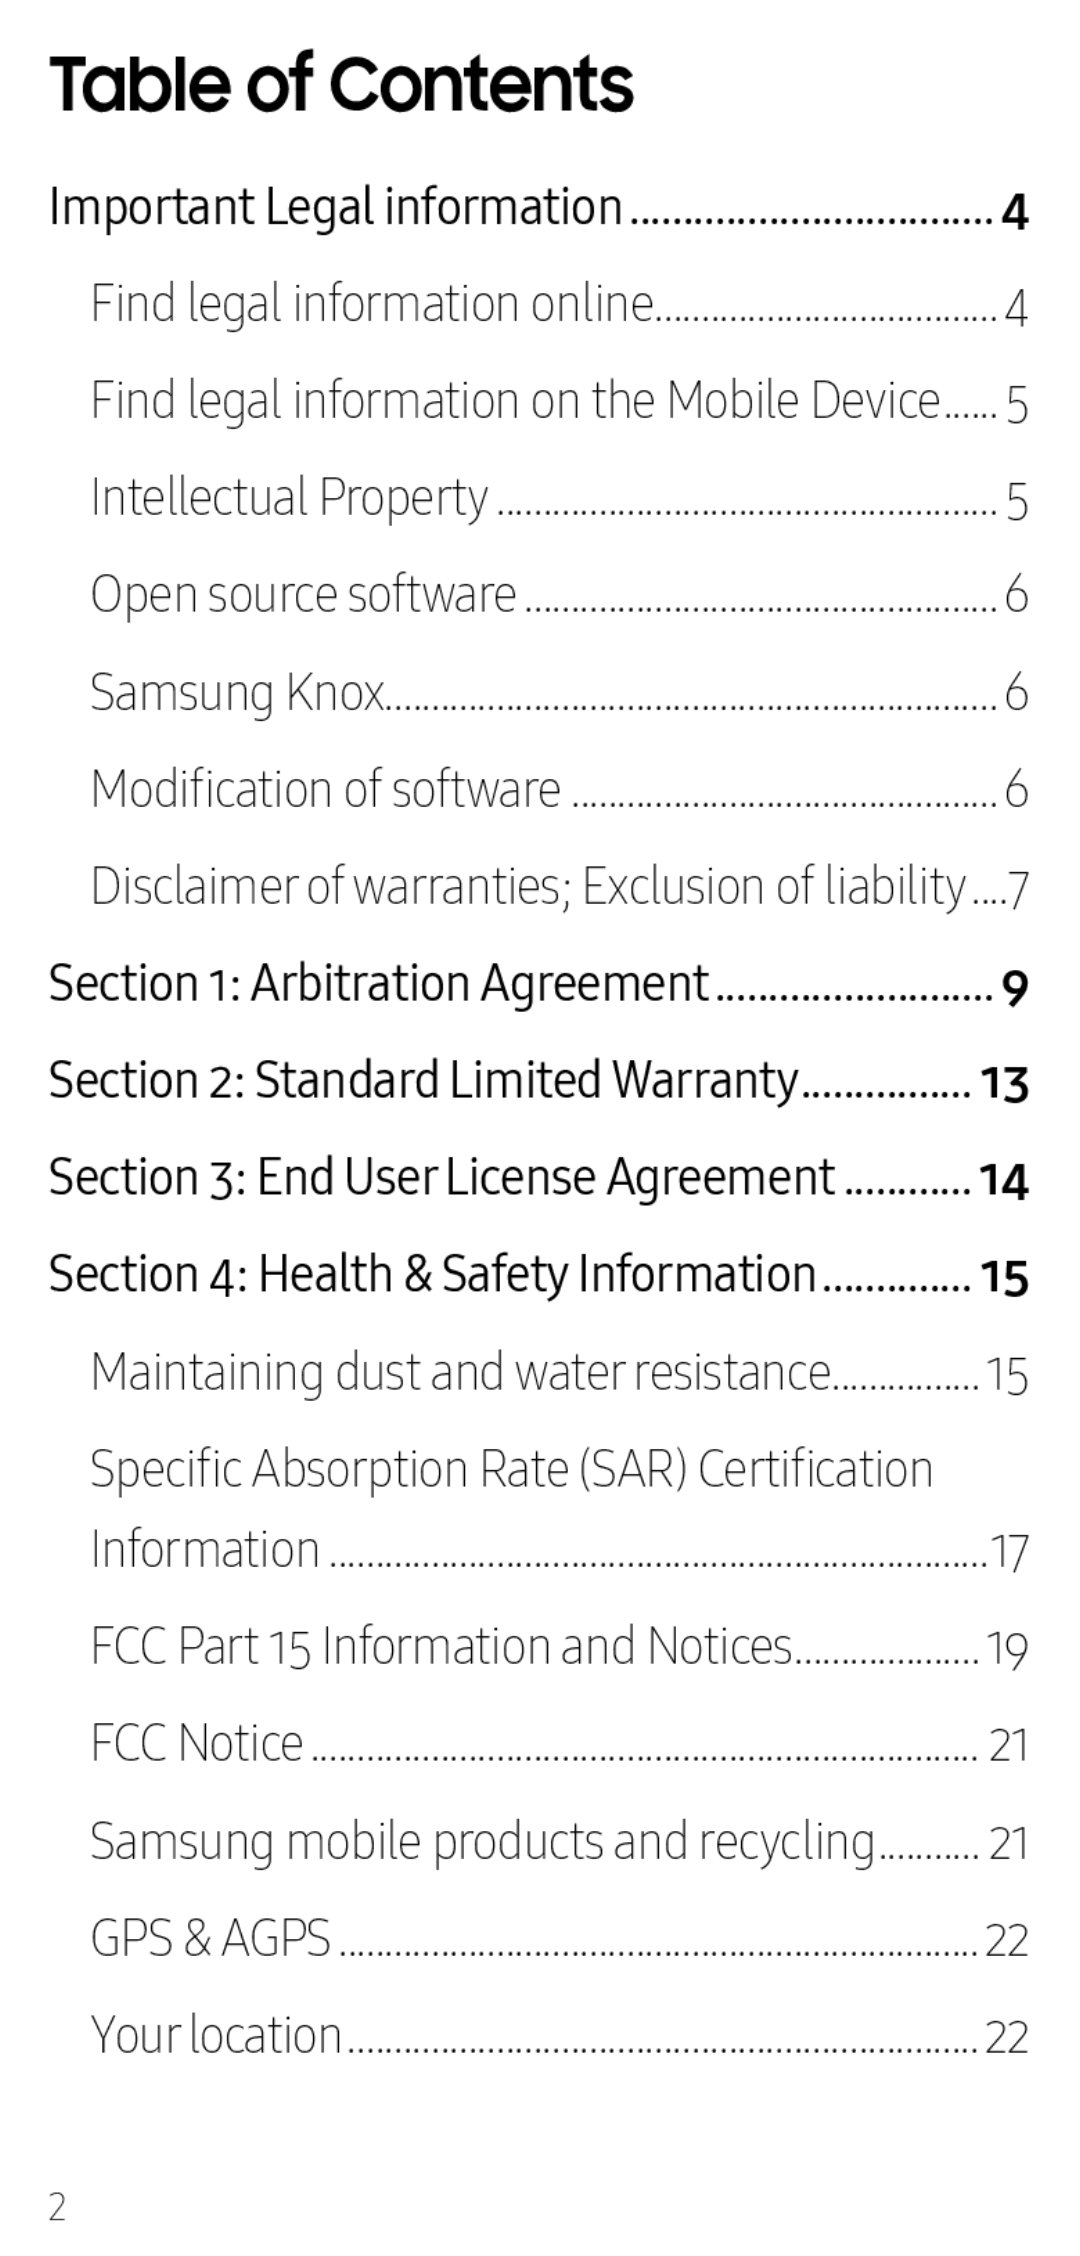 Table of Contents Galaxy S10e Spectrum Mobile